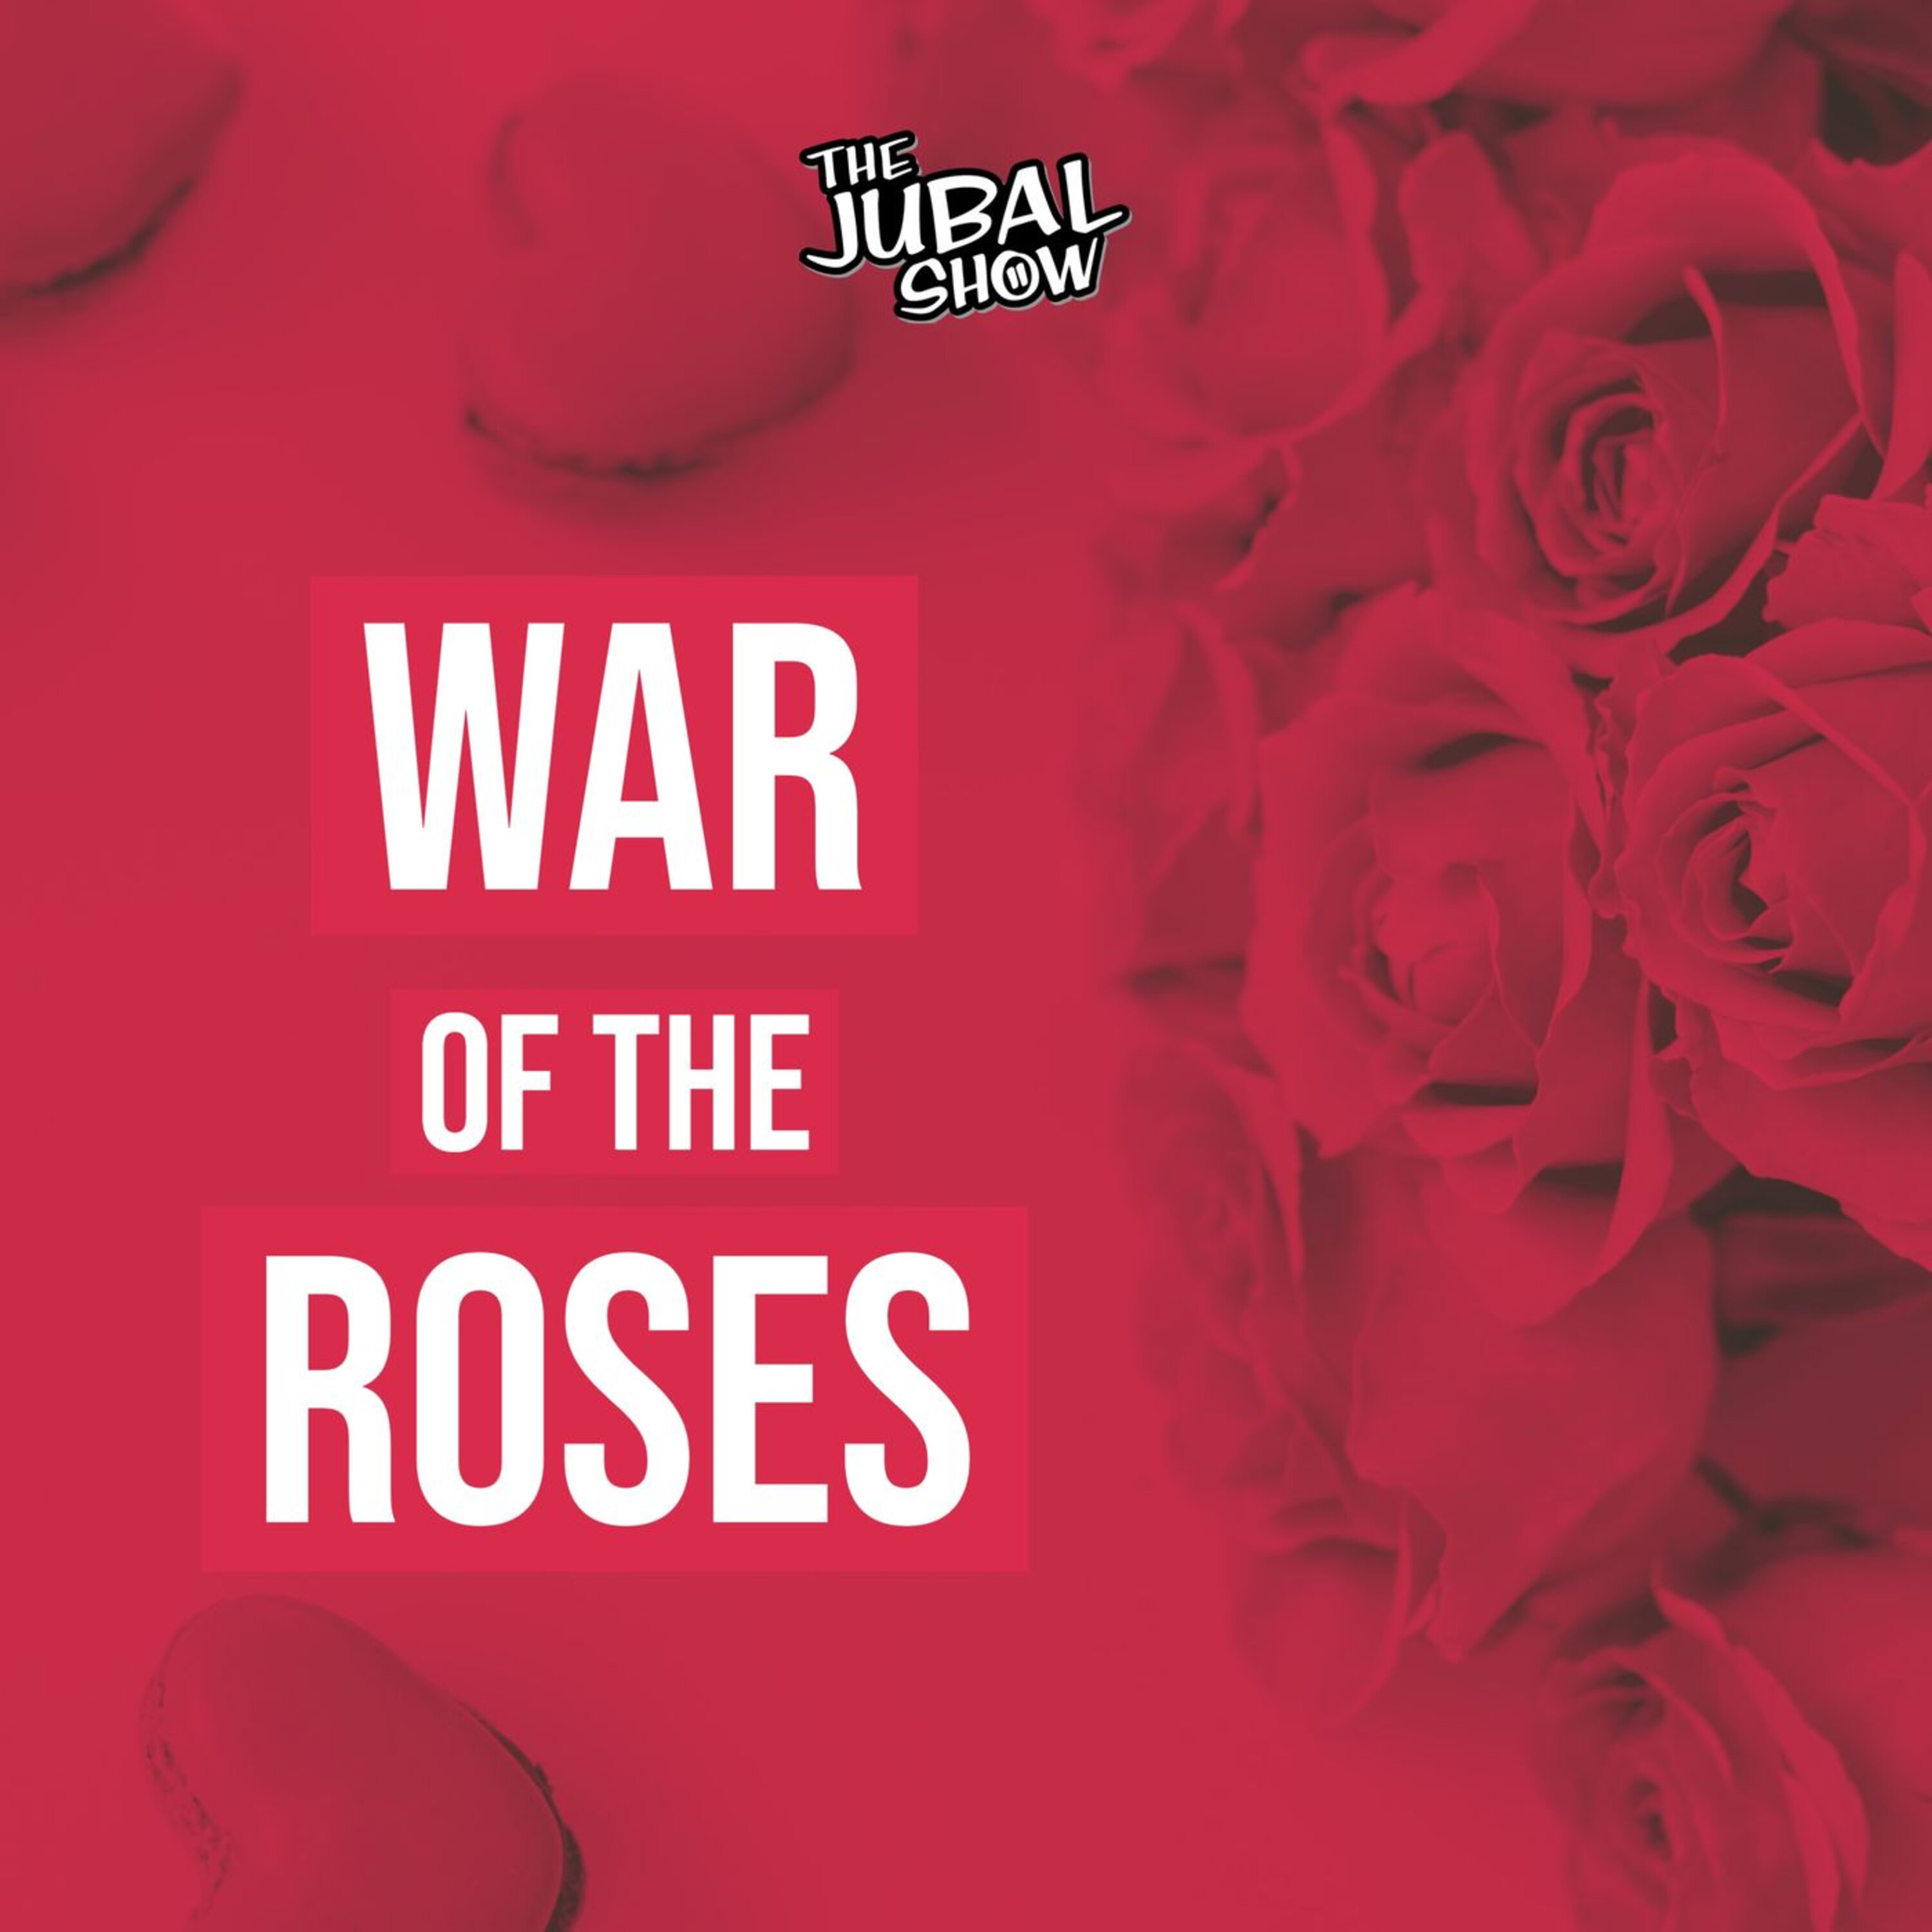 This War Of The Roses will make you think twice about running a red light!